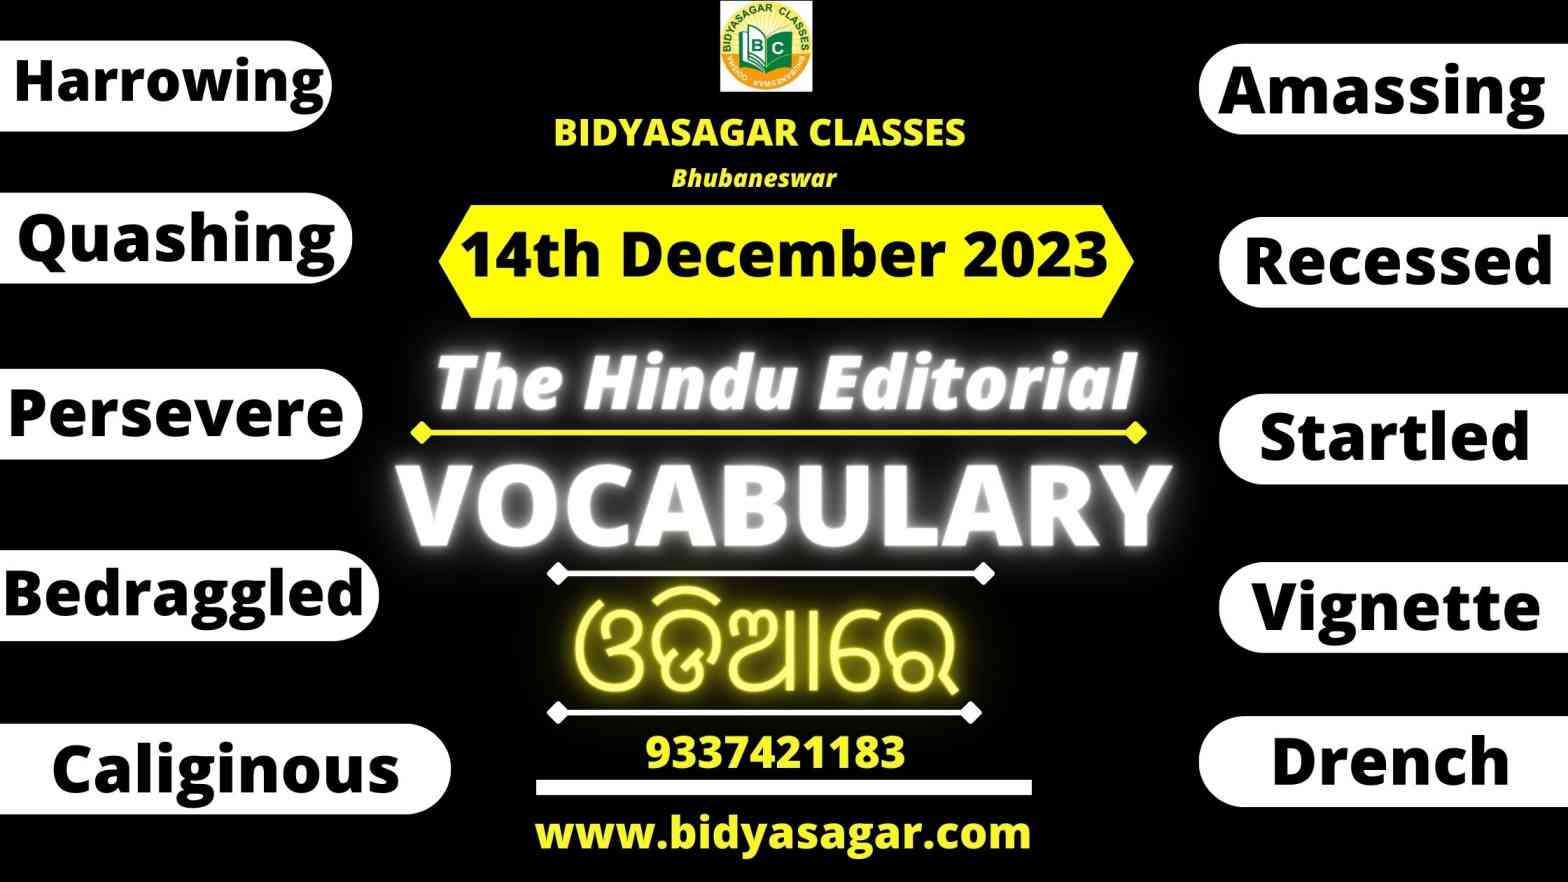 The Hindu Editorial Vocabulary of 14th December 2023